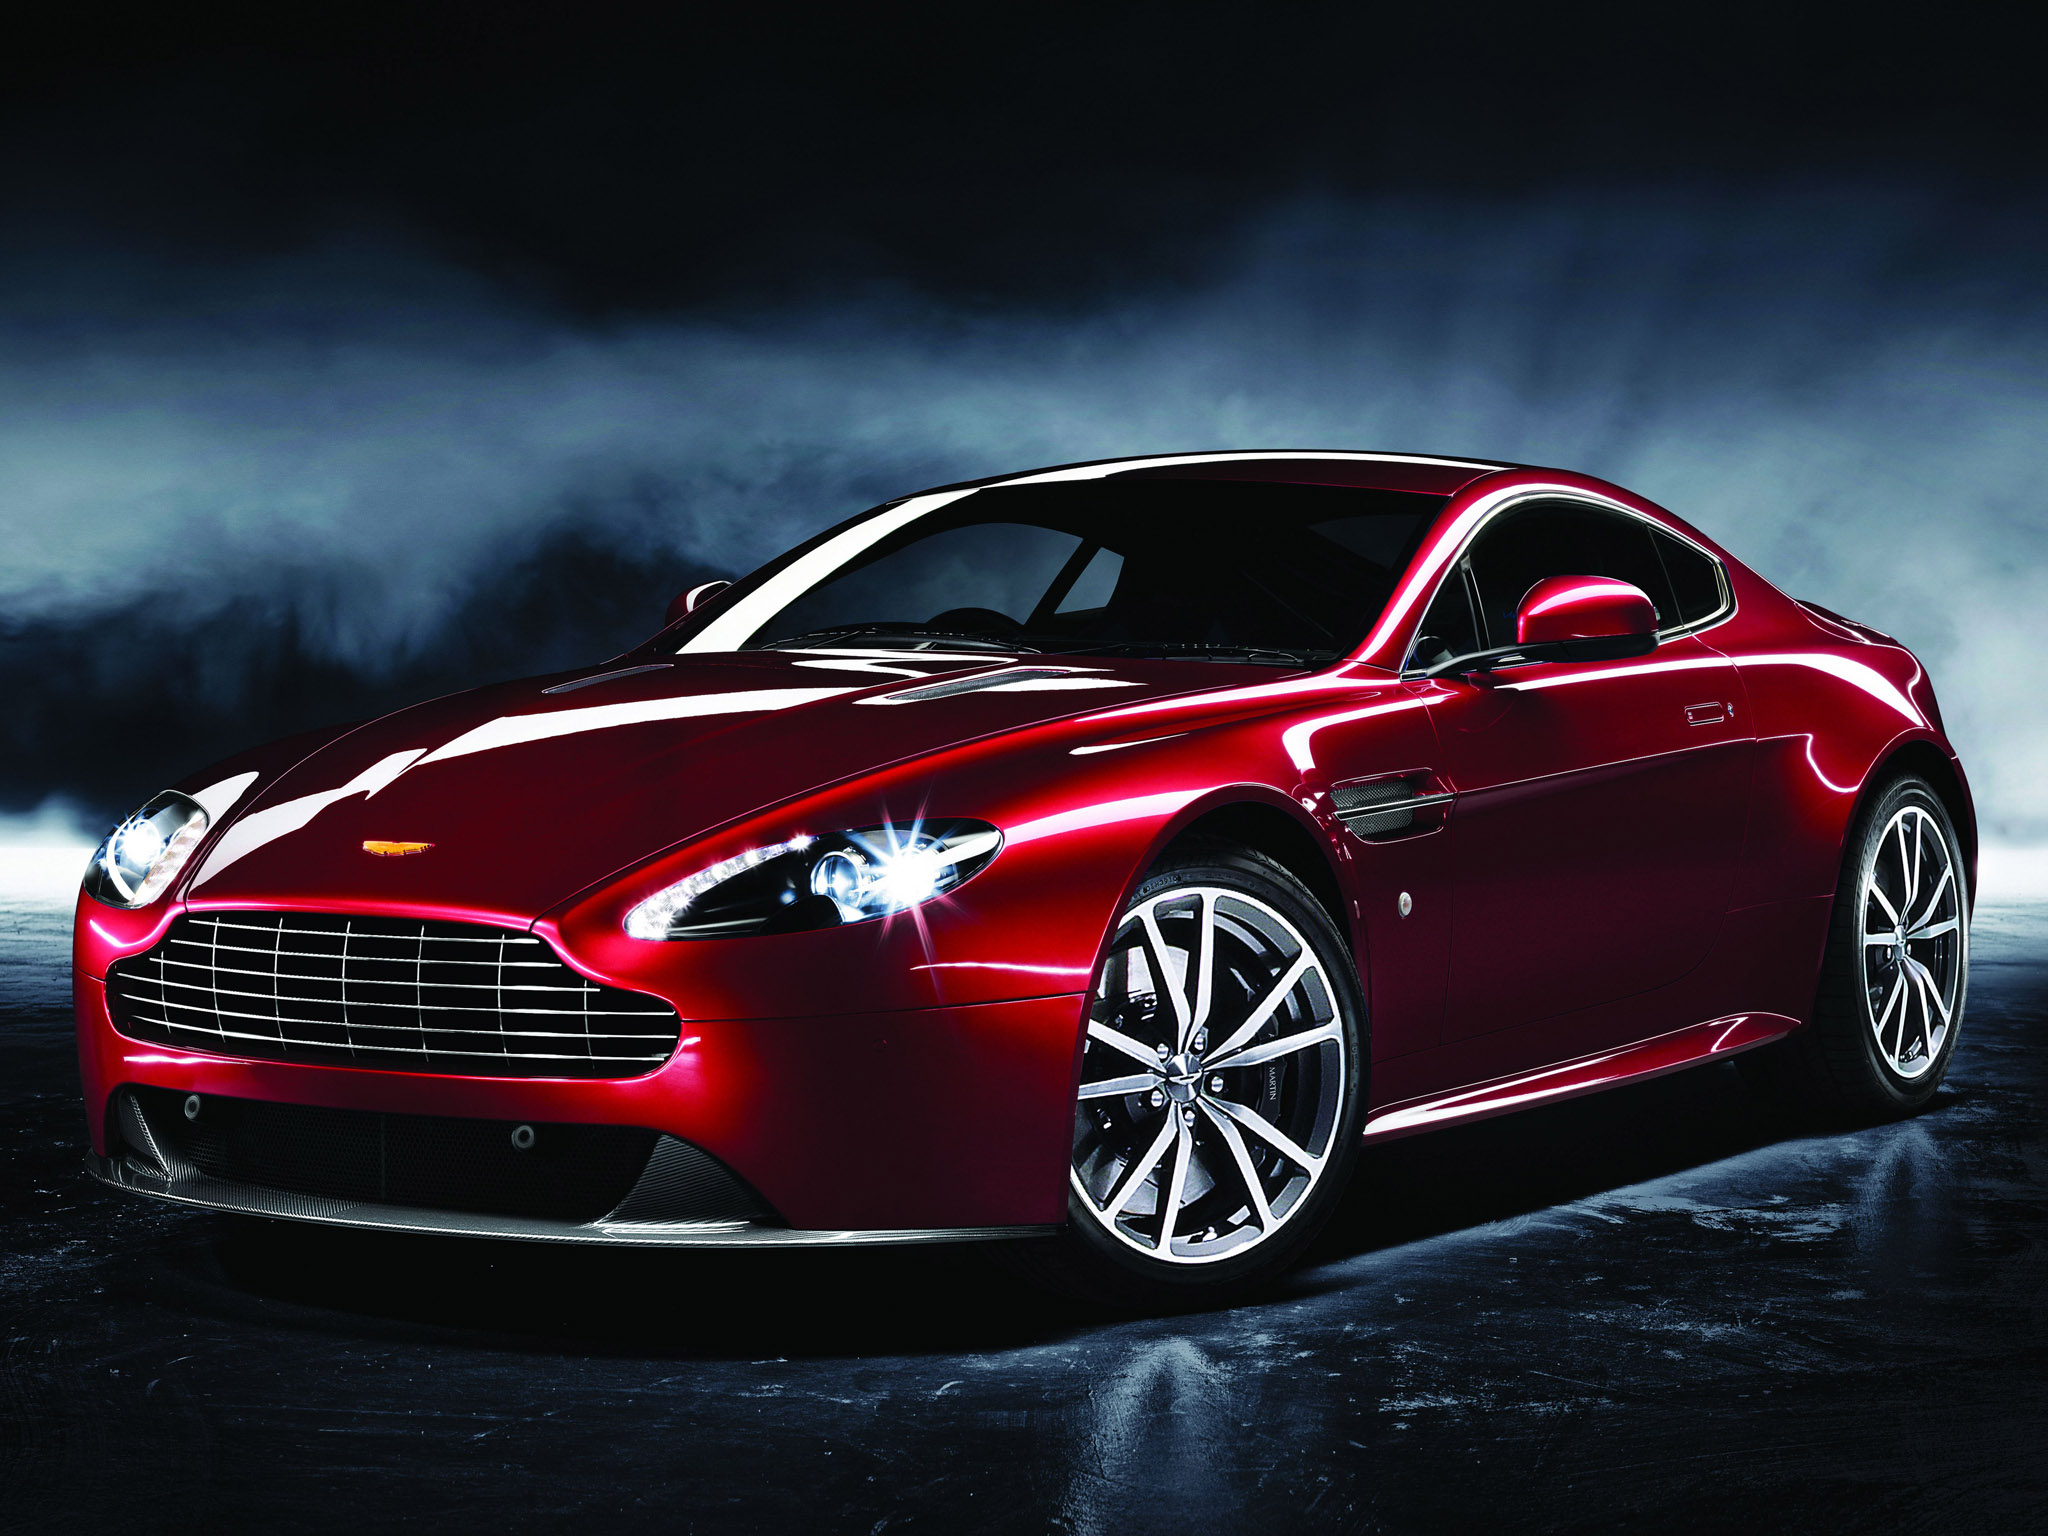 Unparalleled Luxury: The 2012 Aston Martin Dragon 88 Limited Edition